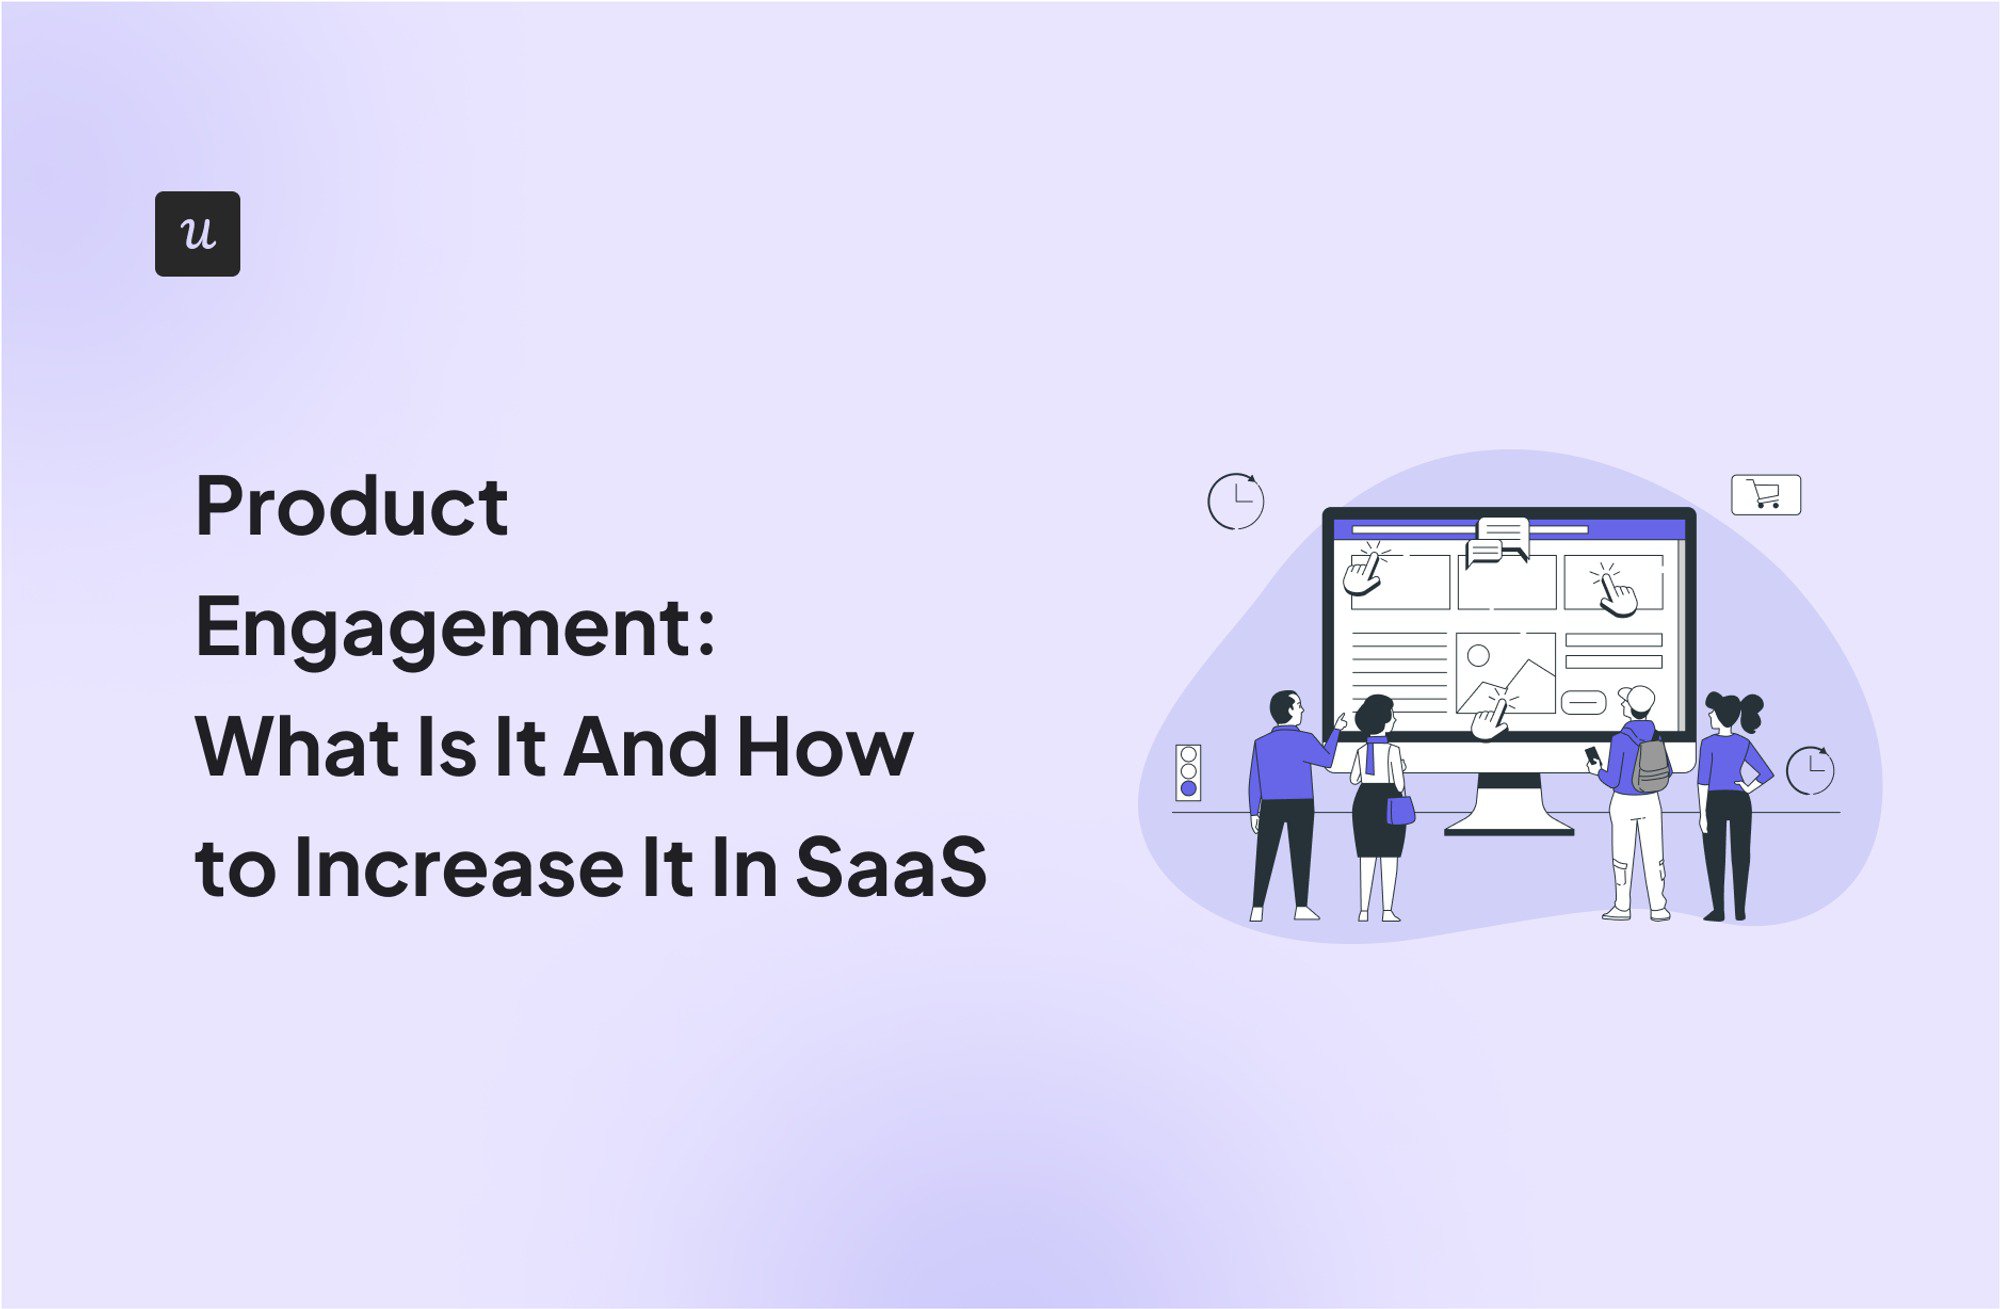 Product Engagement: What Is It And How to Increase It In SaaS cover